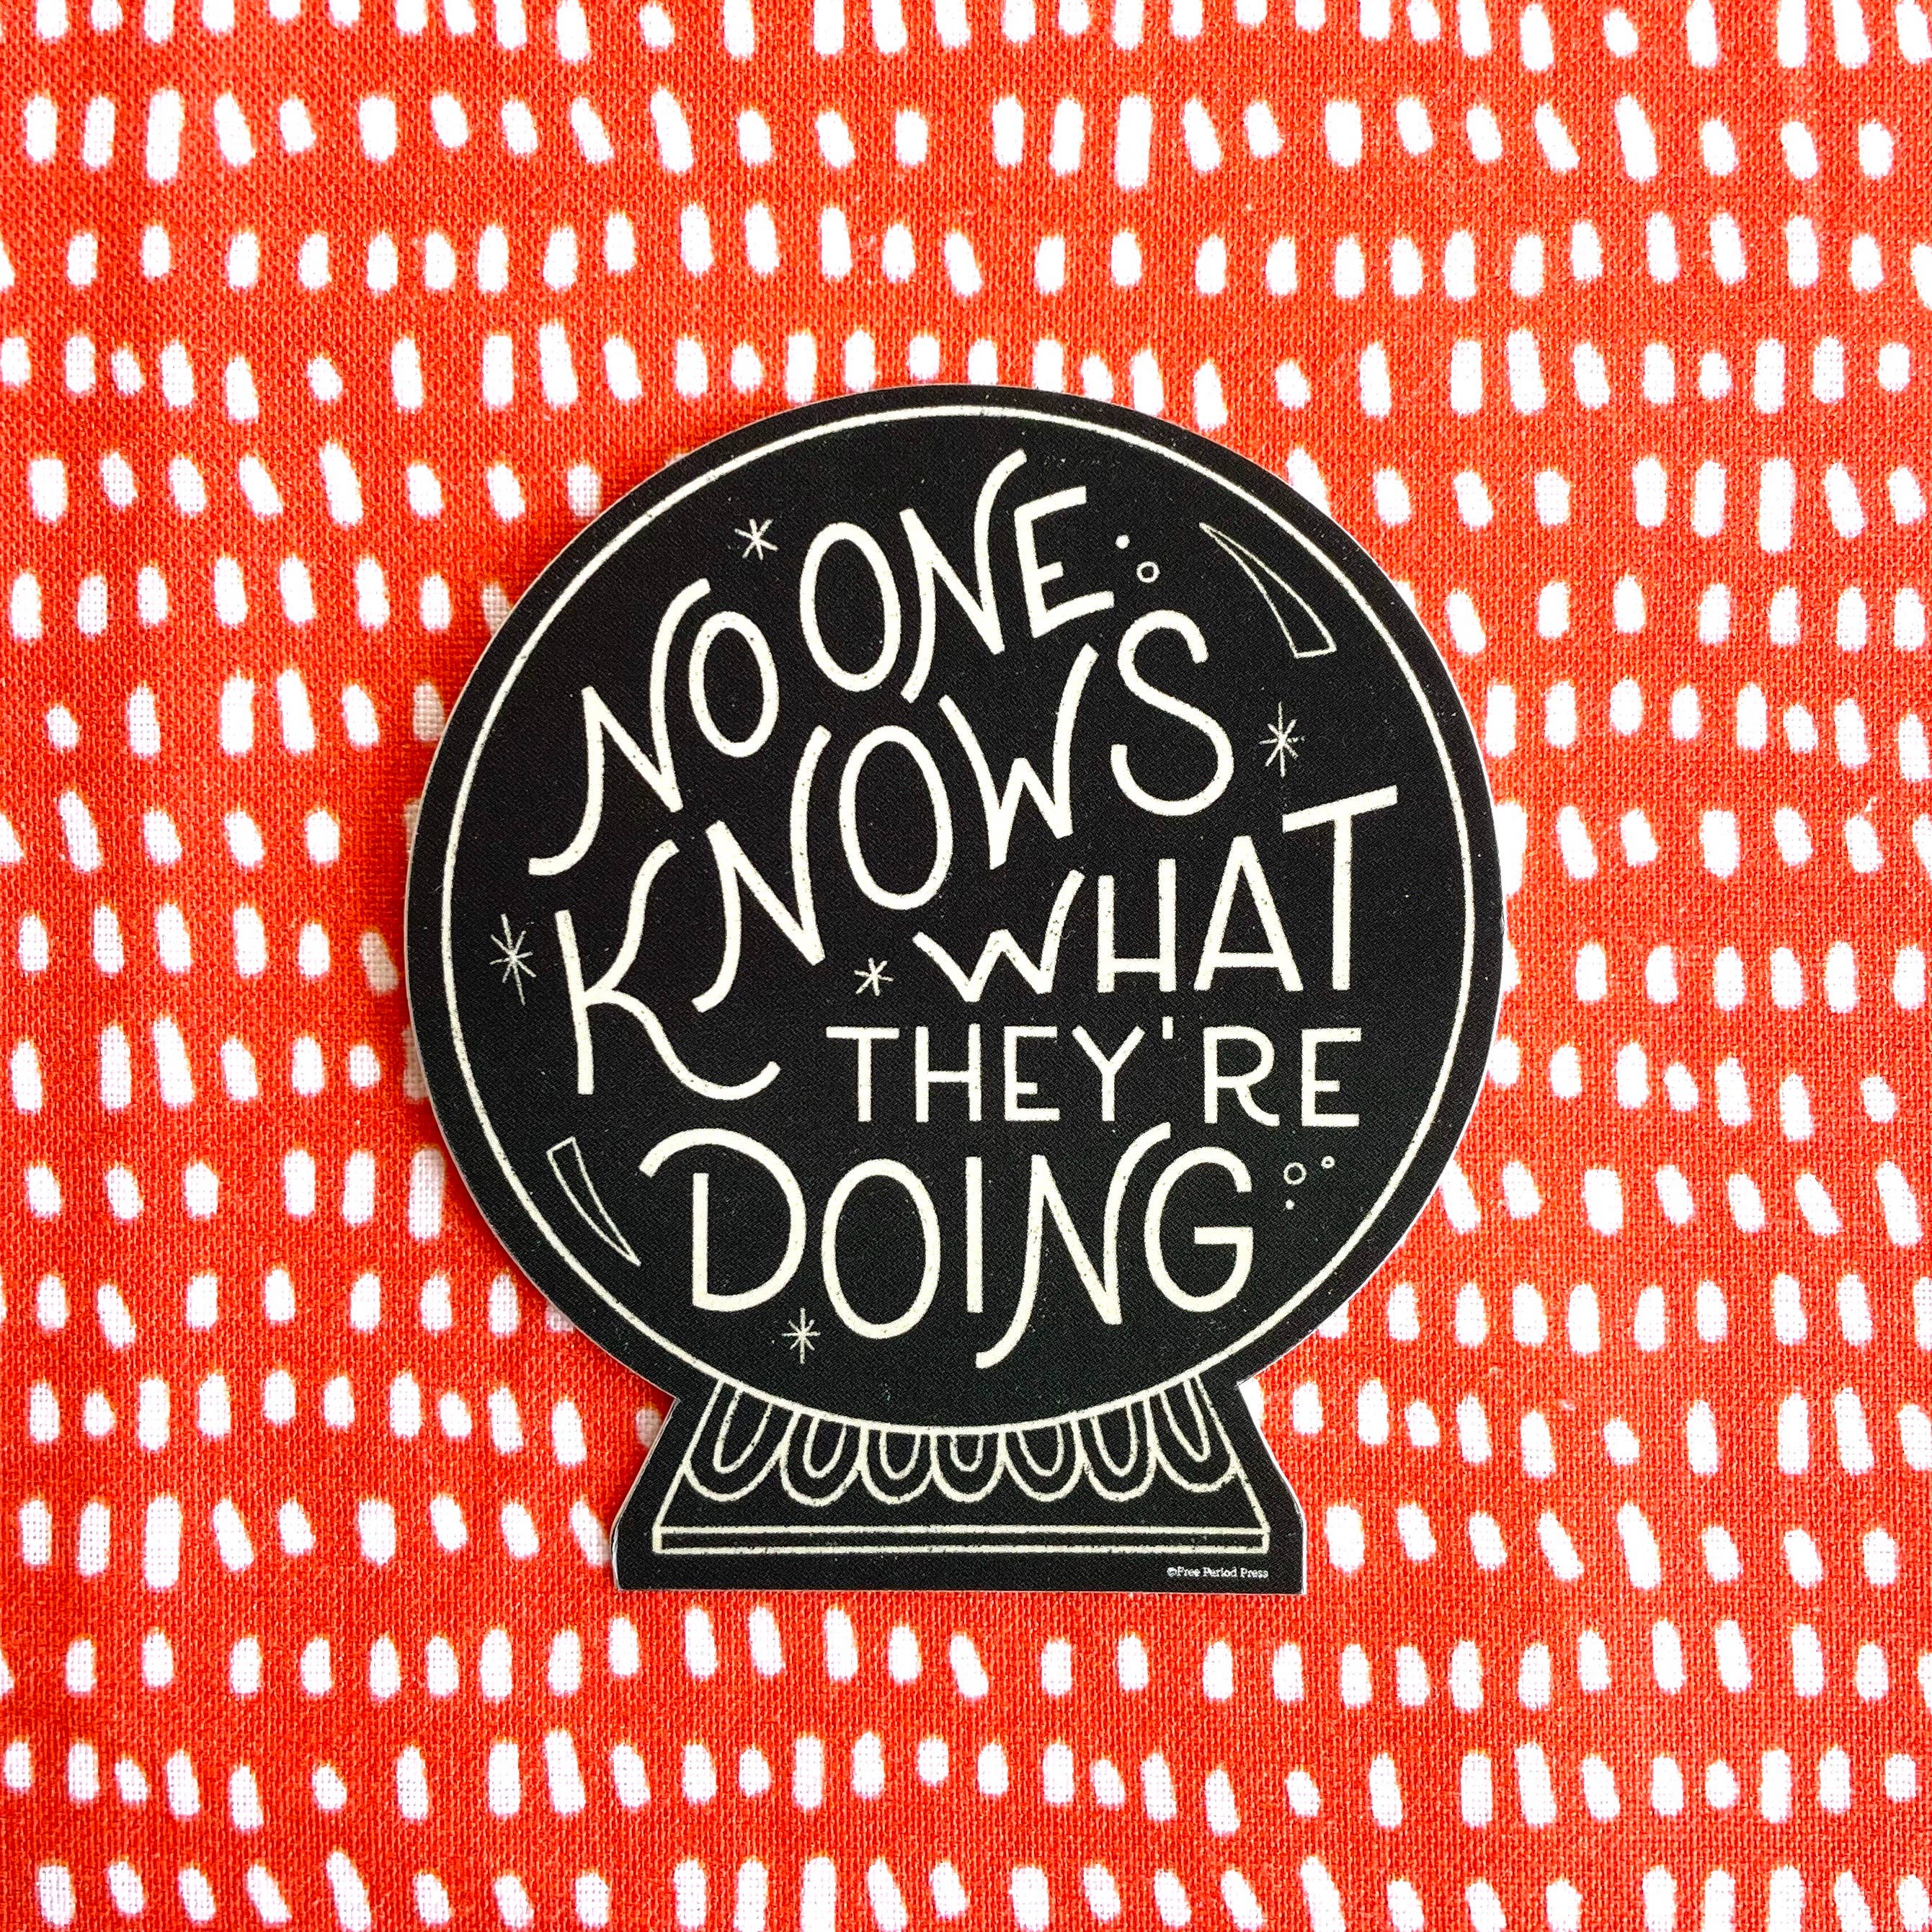 No One Knows What They're Doing - Vinyl Decal Sticker